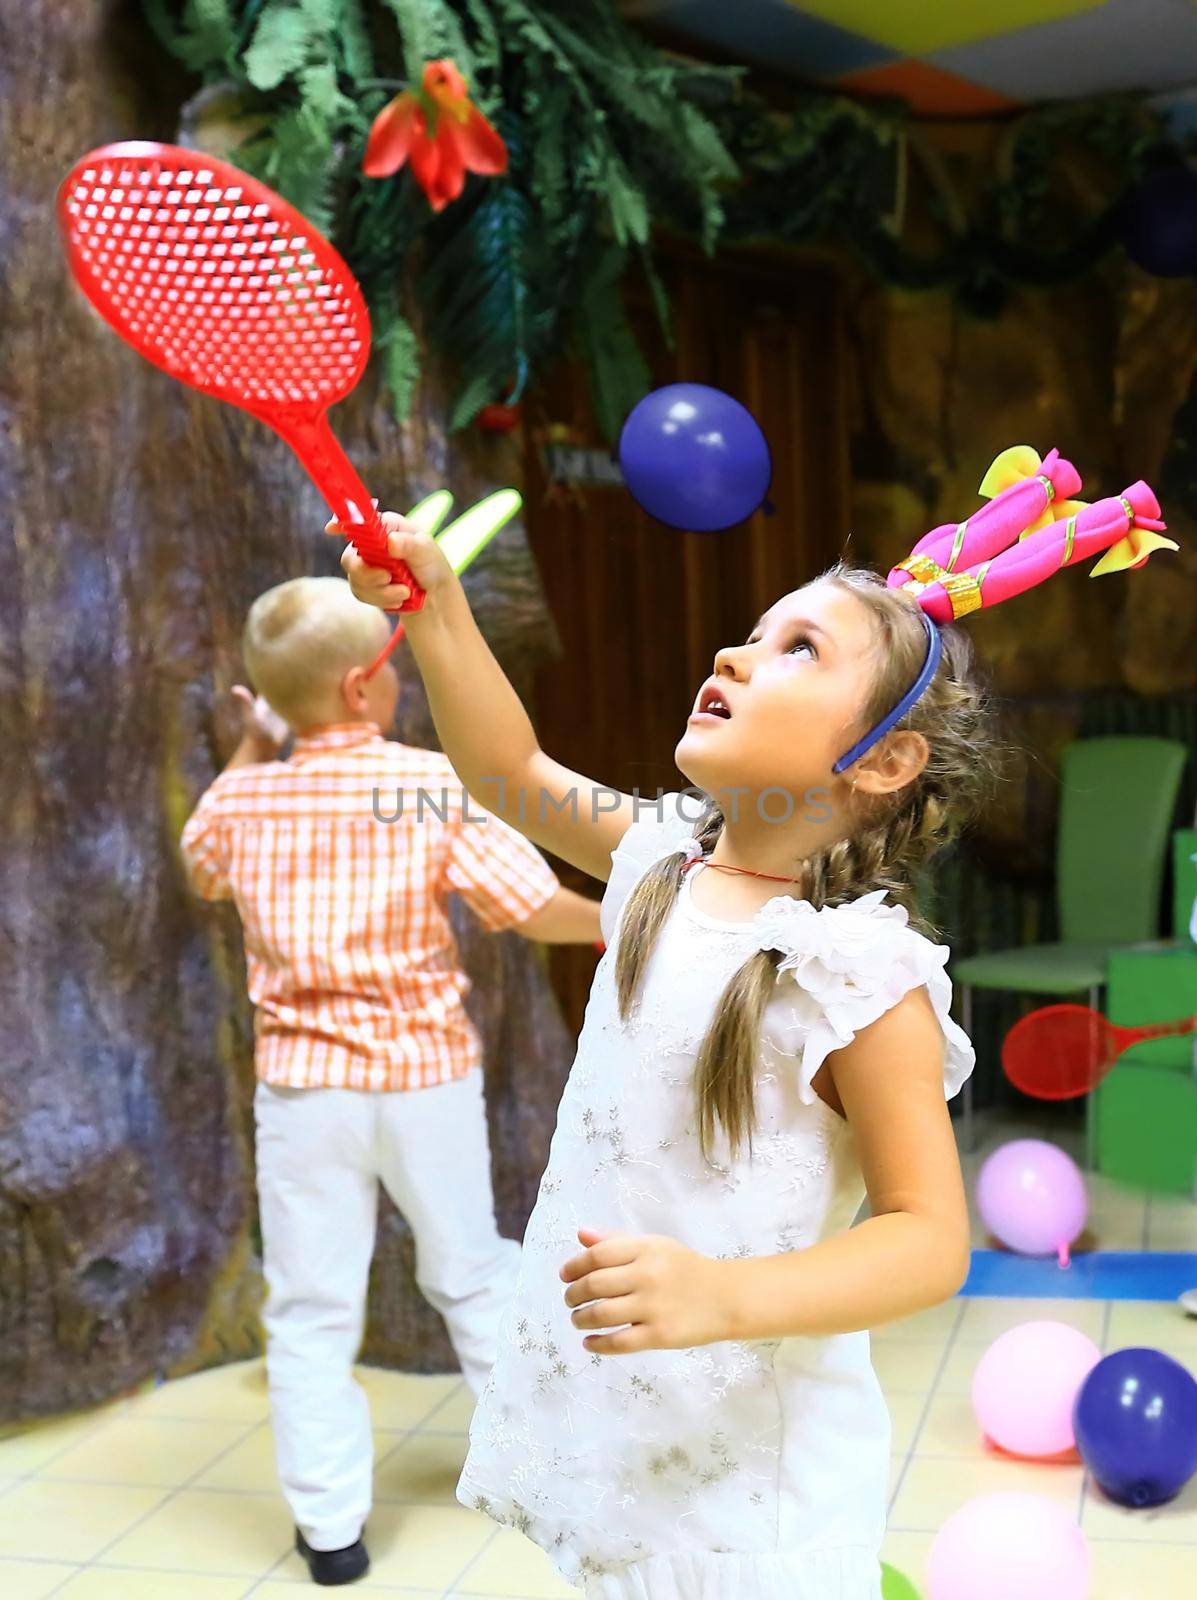 little girl playing in a children's entertainment center.holidays and events